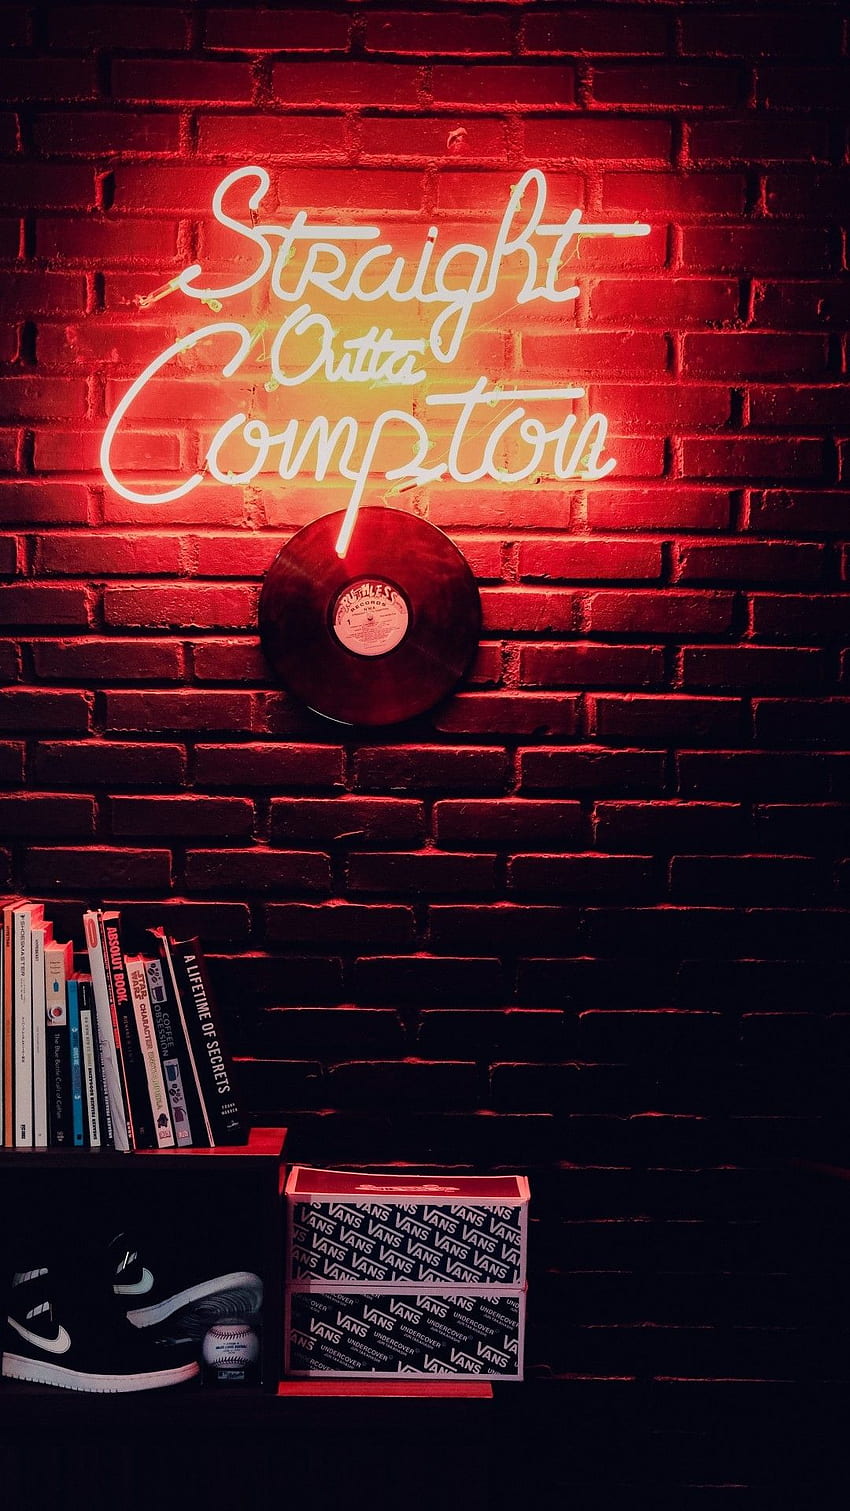 Vinyl Record, Neon Light, Wall, Books for iPhone 8, iPhone 7 Plus, iPhone 6+, Sony Xperia Z, HTC One HD phone wallpaper